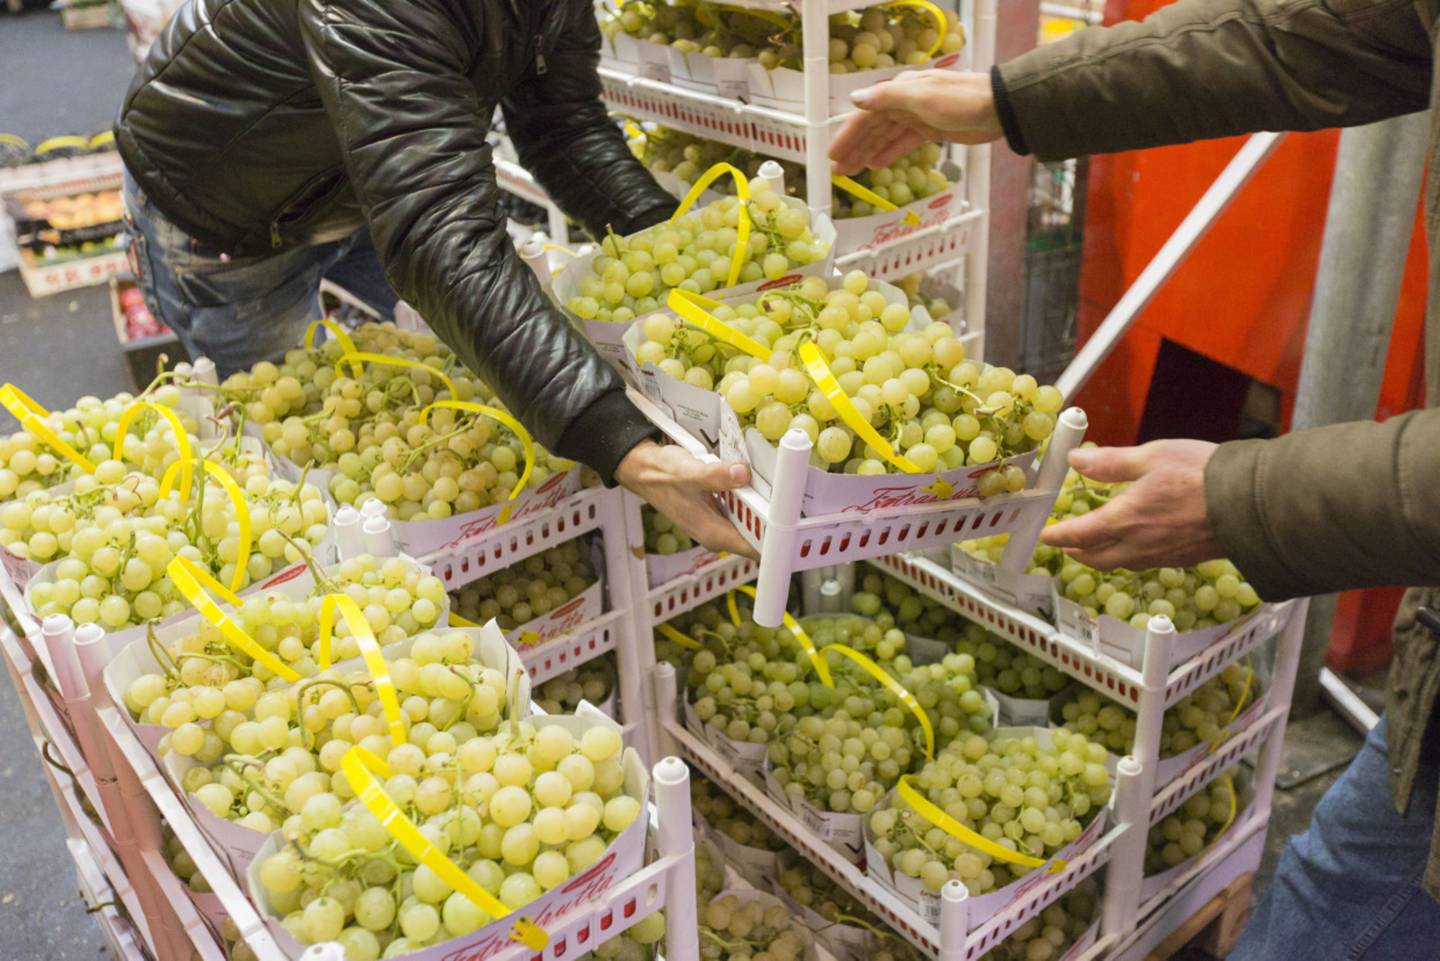 The price of a kilo of grapes in Mexico has risen by around 10% year-on-year, and the fruit is at its most expensive in the country's north.